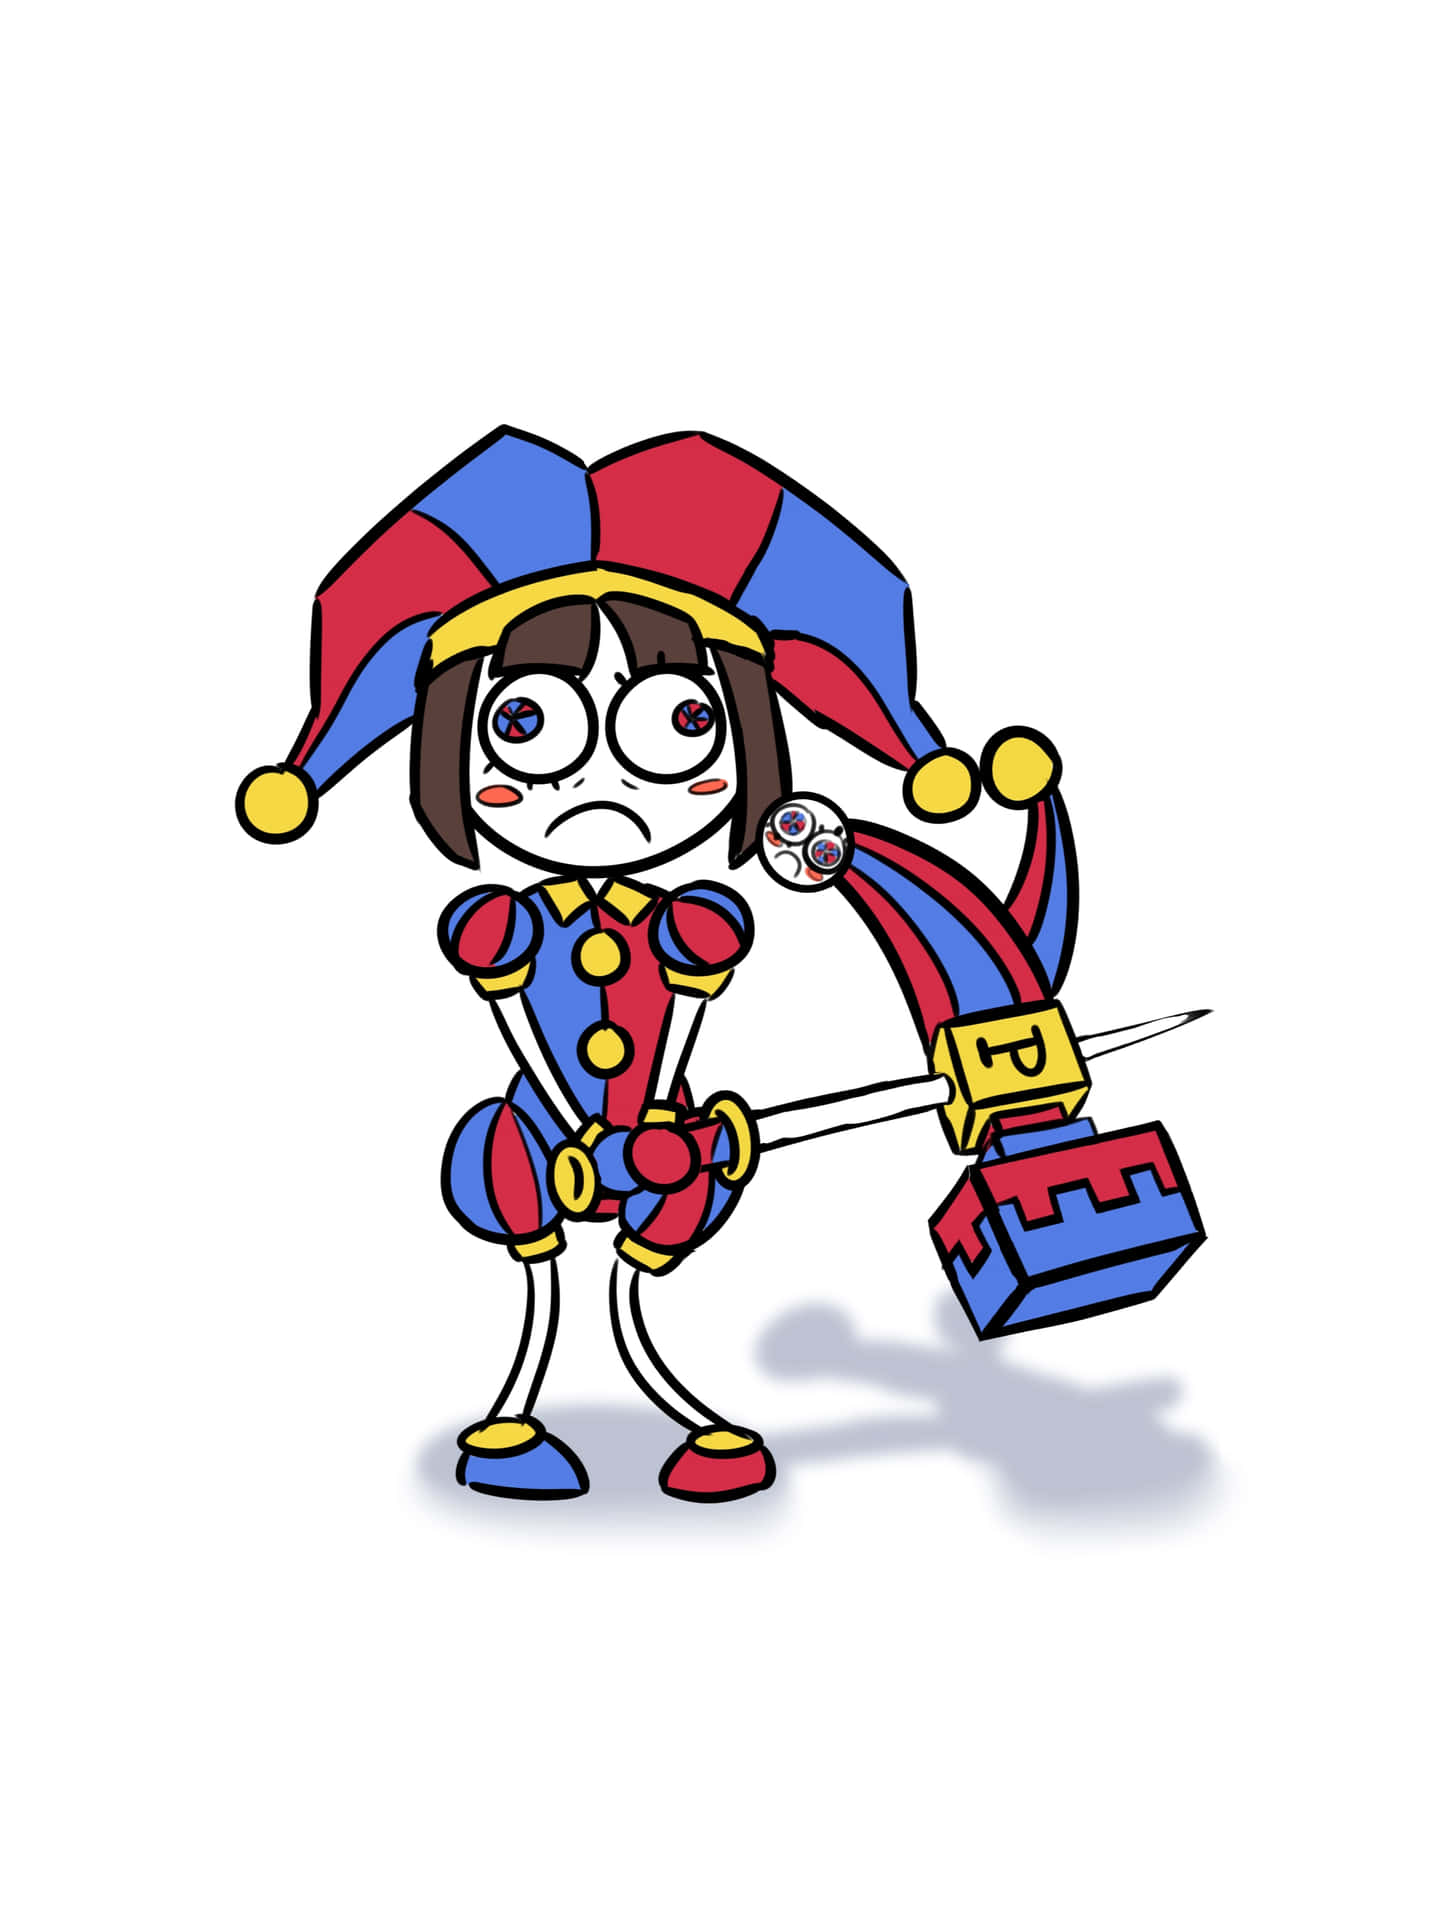 Colorful Jester Cartoon Character Wallpaper